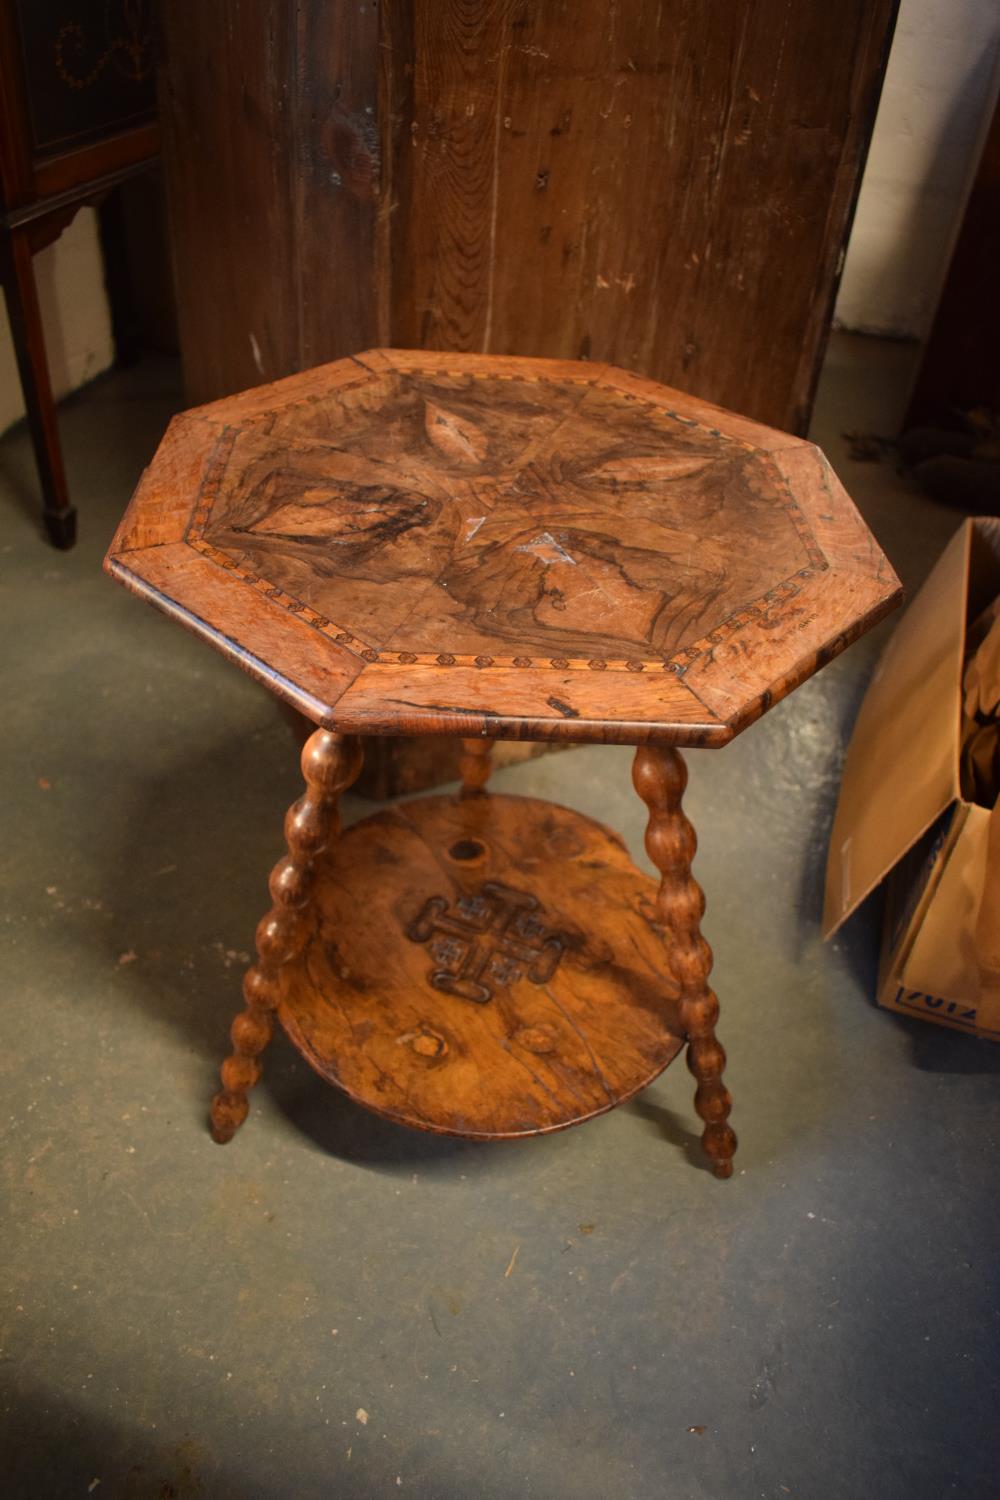 Olivewood Jerusalem tripod table, early 20th century. In bad condition in need of attention. Top